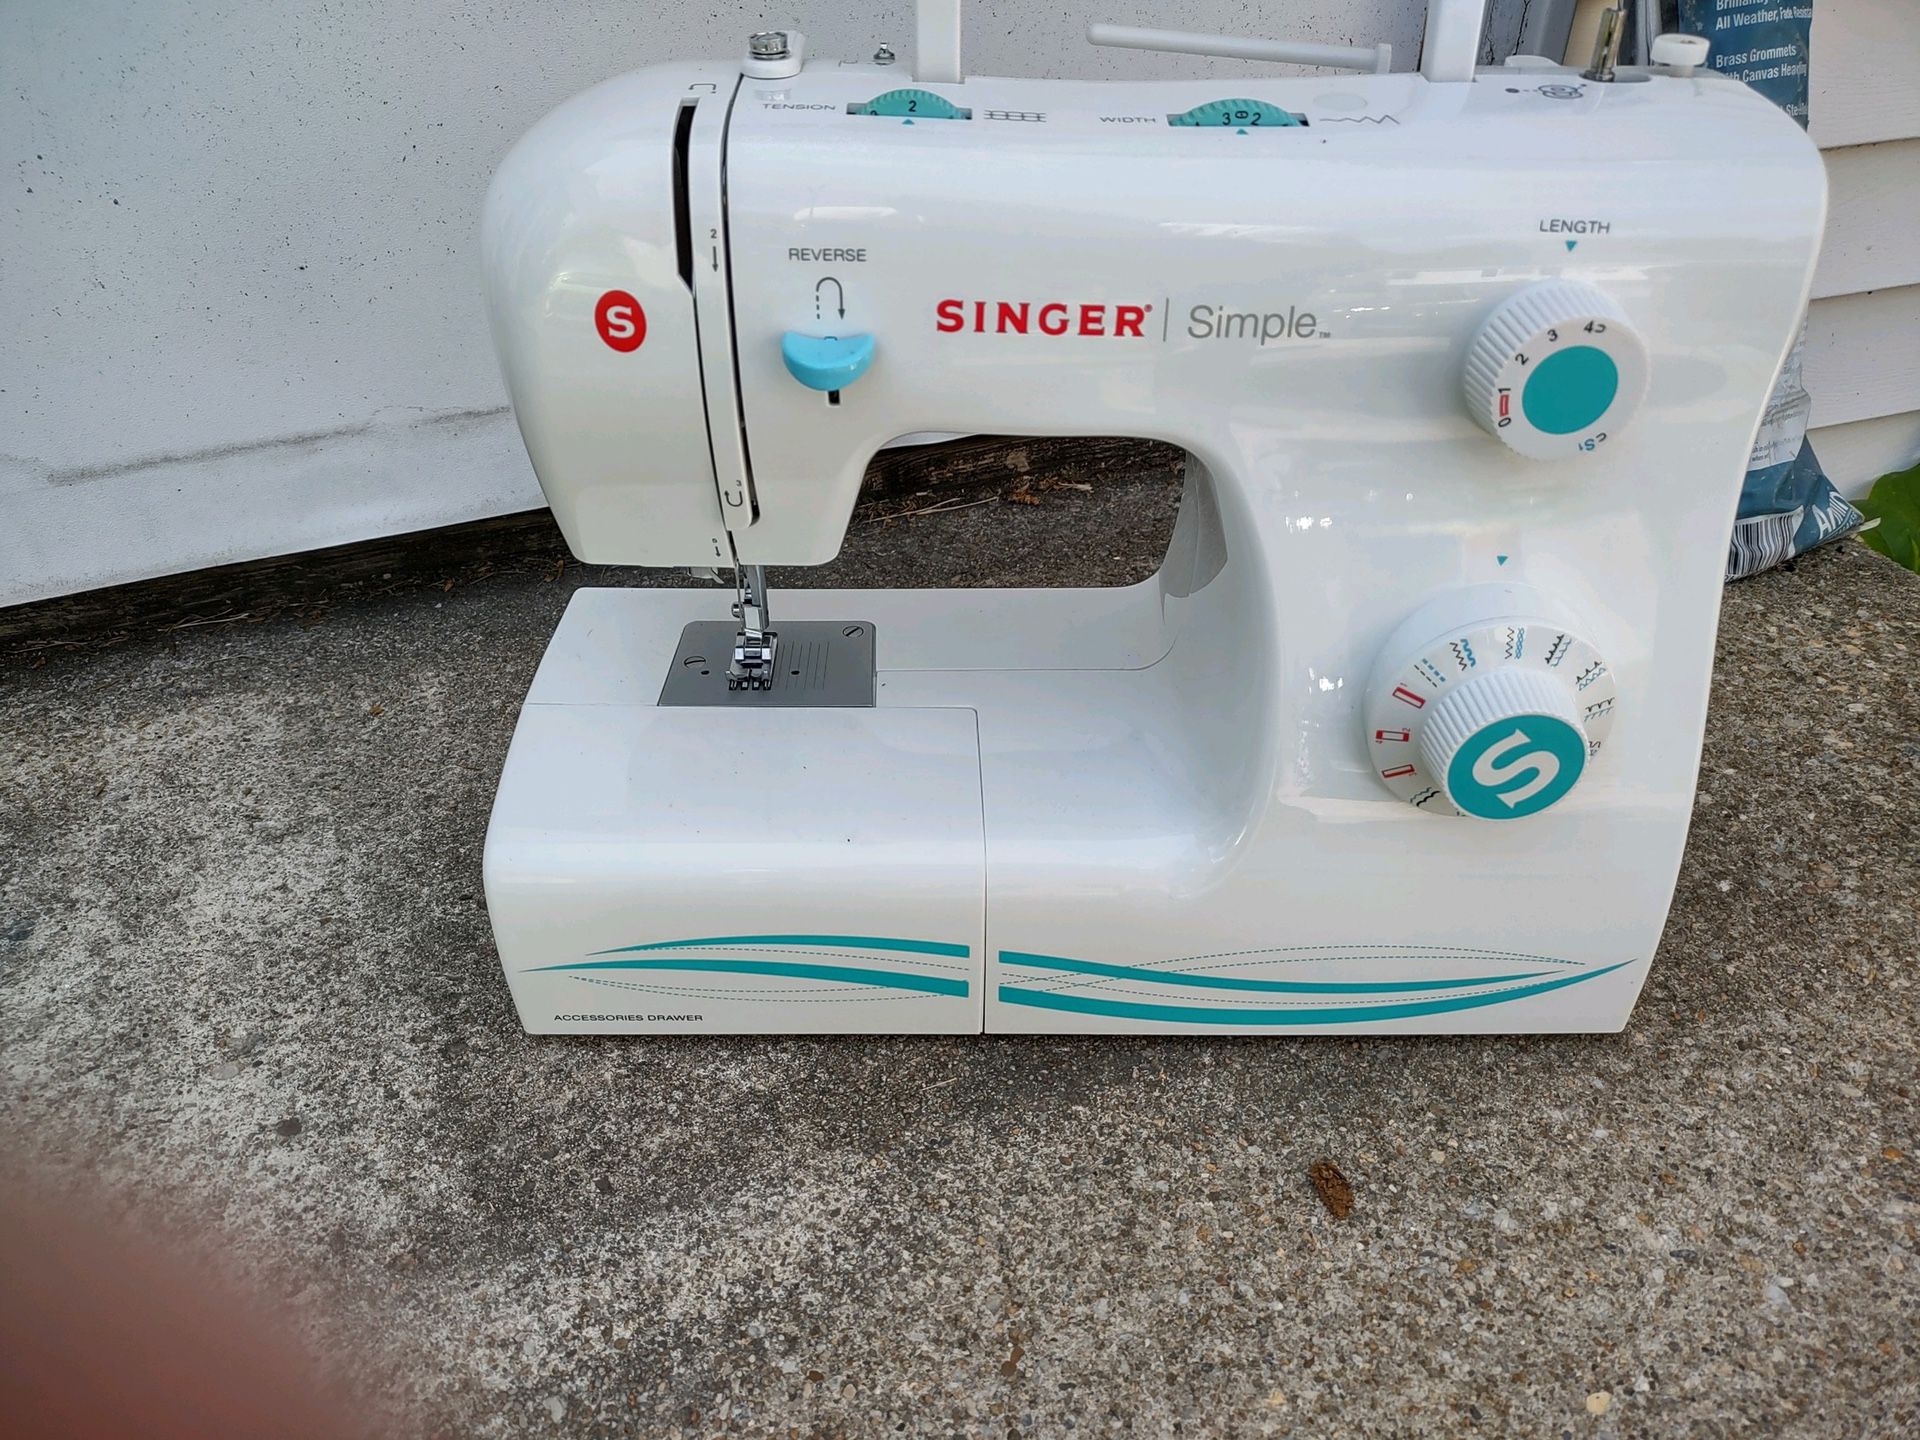 Singer Sewing Machine And Bag